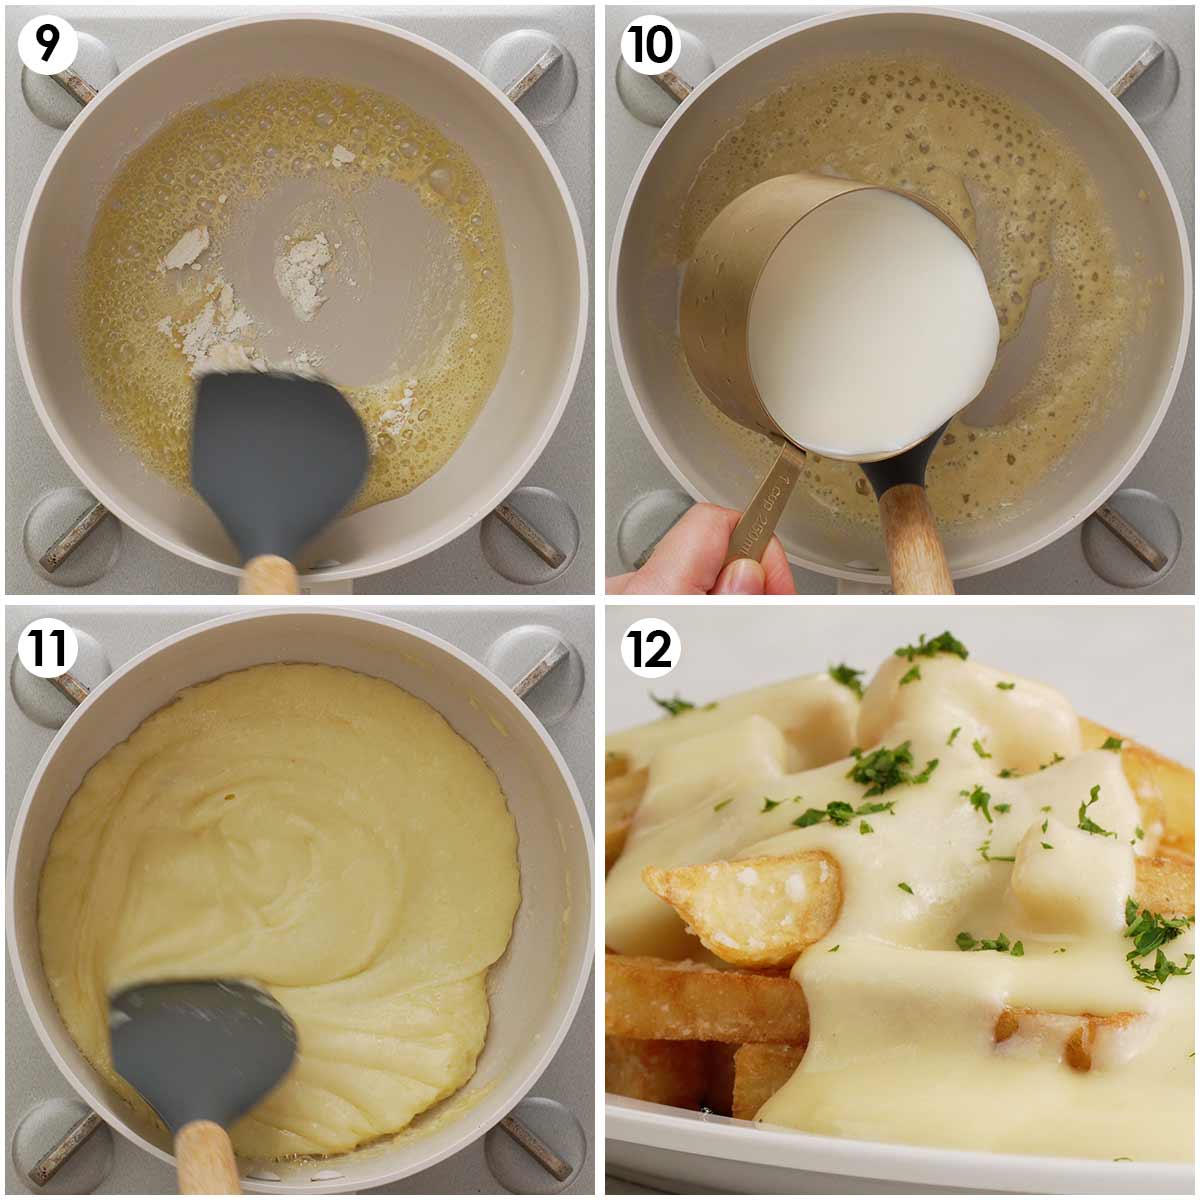 4 image collage showing how to make cheese sauce and how to serve with fried chips. 